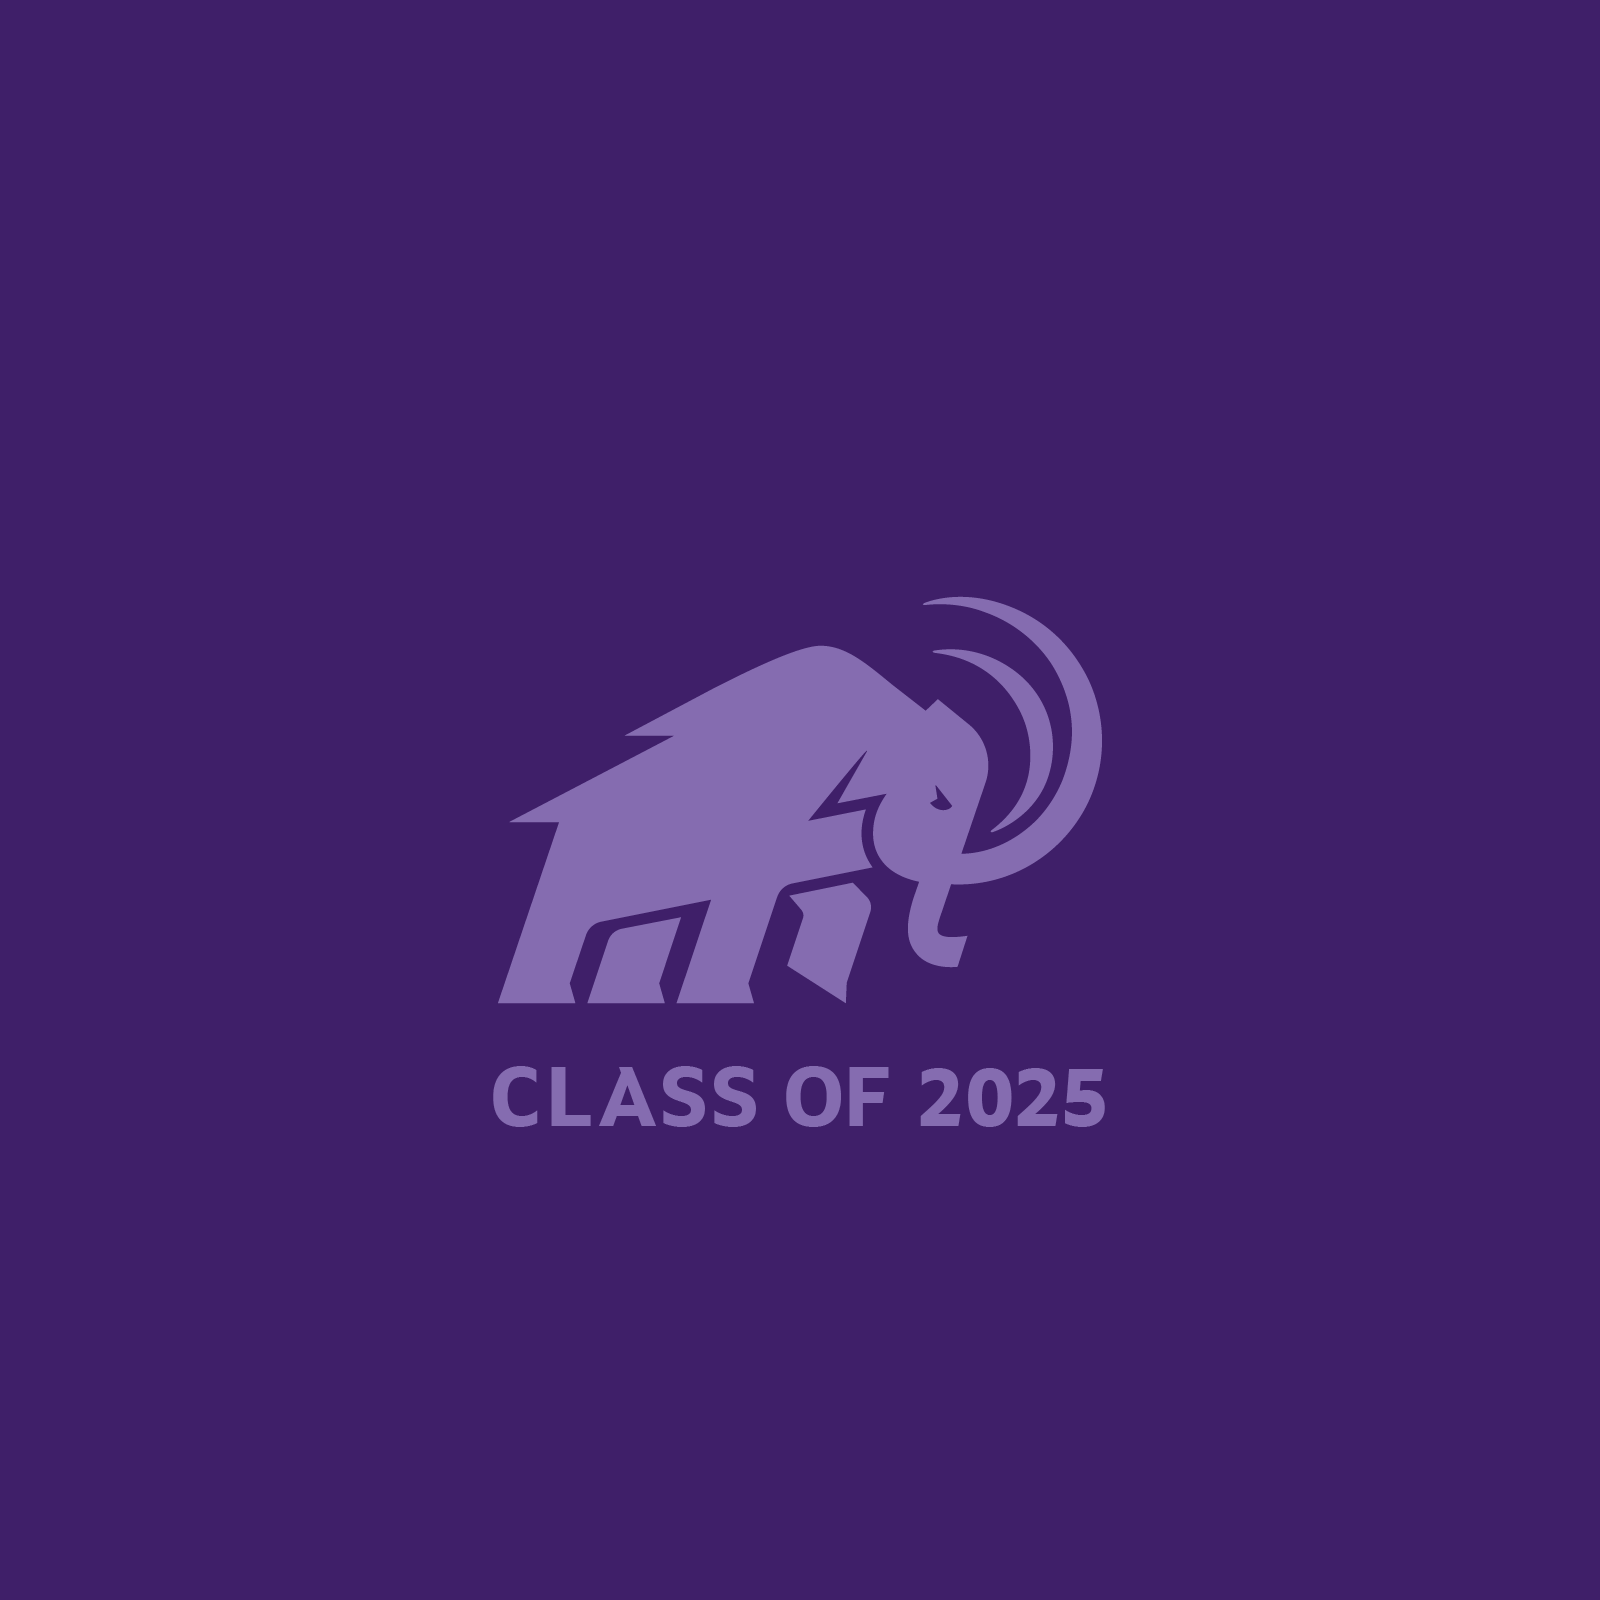 mammoth on purple background with Class of 2025